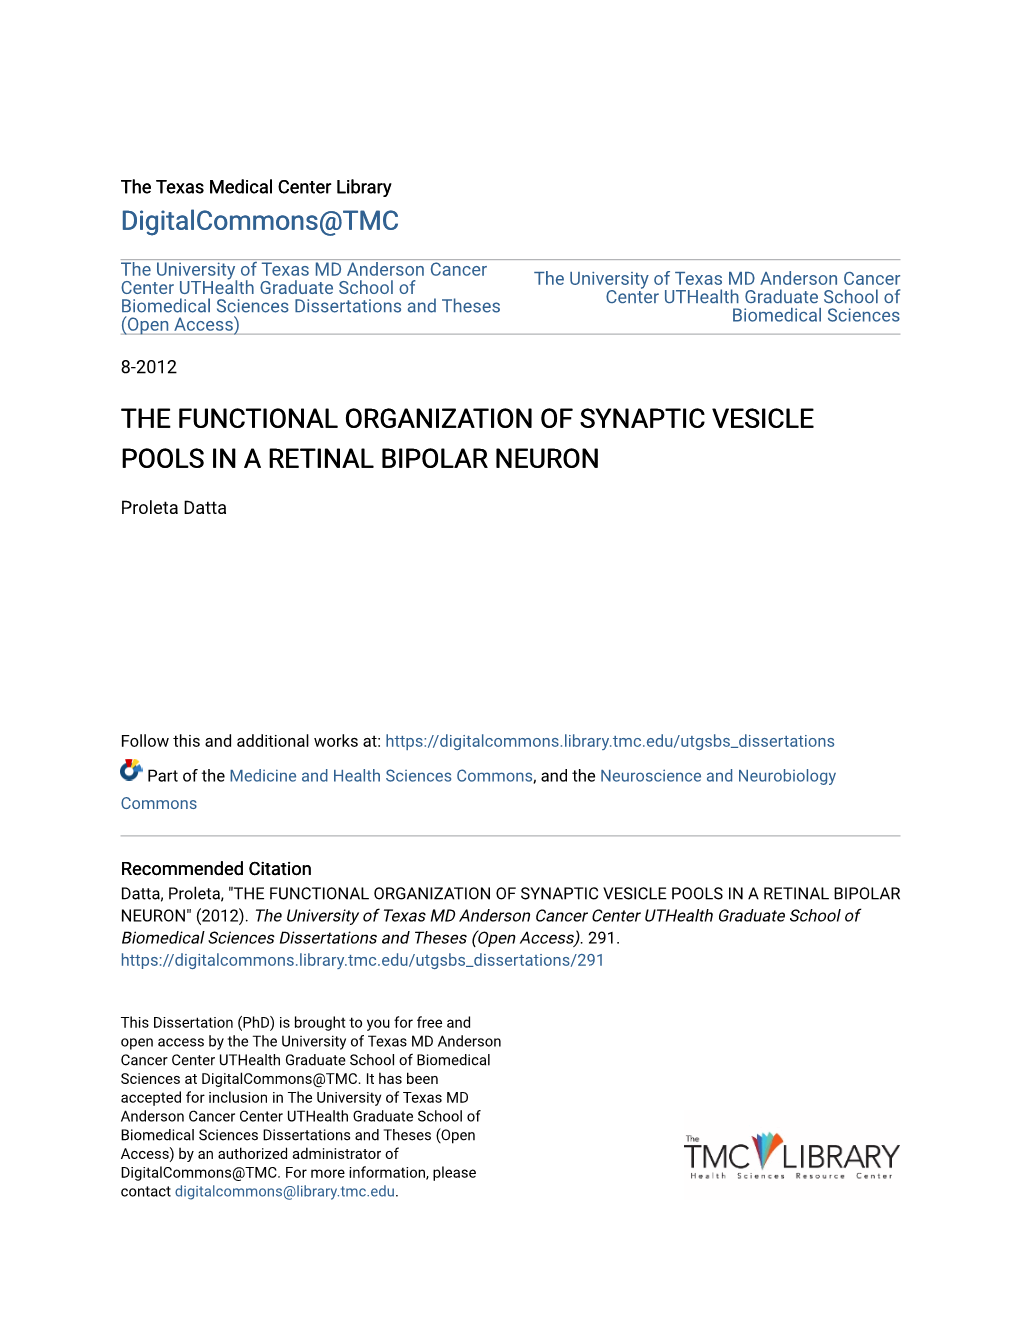 The Functional Organization of Synaptic Vesicle Pools in a Retinal Bipolar Neuron